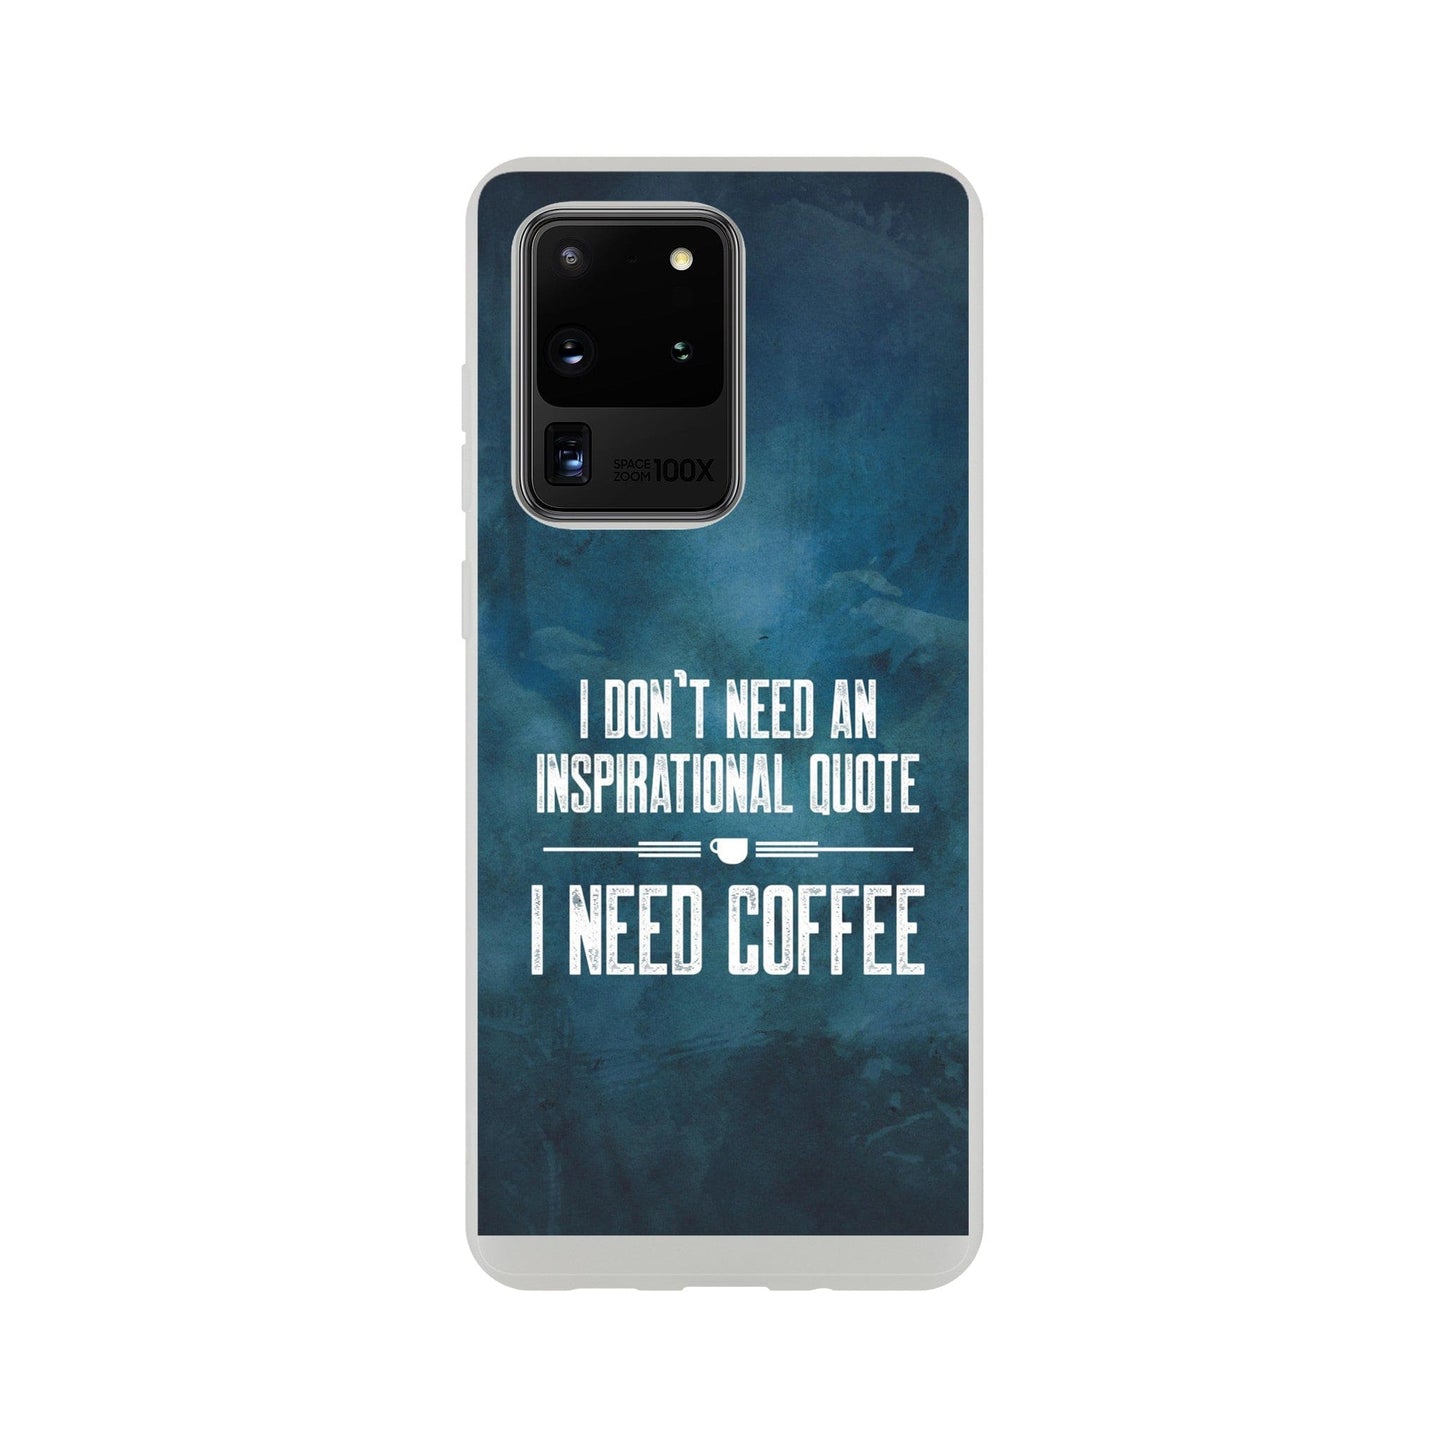 Good Bean Gifts "Coffee not Quotes" Flexi Cell Phone Case Galaxy S20 Ultra